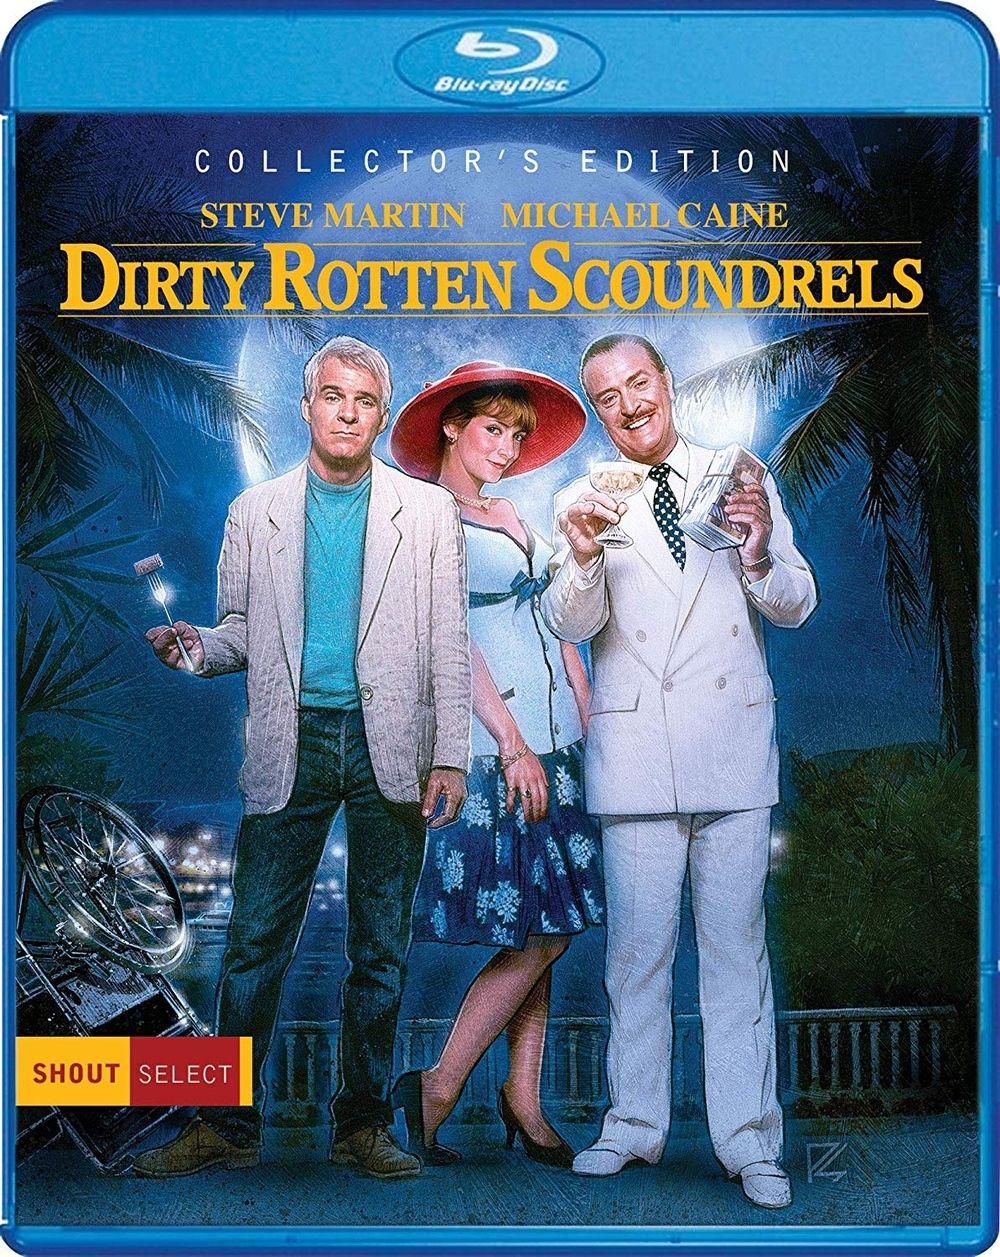 Dirty Rotten Scoundrels Collector's Edition Blu-ray